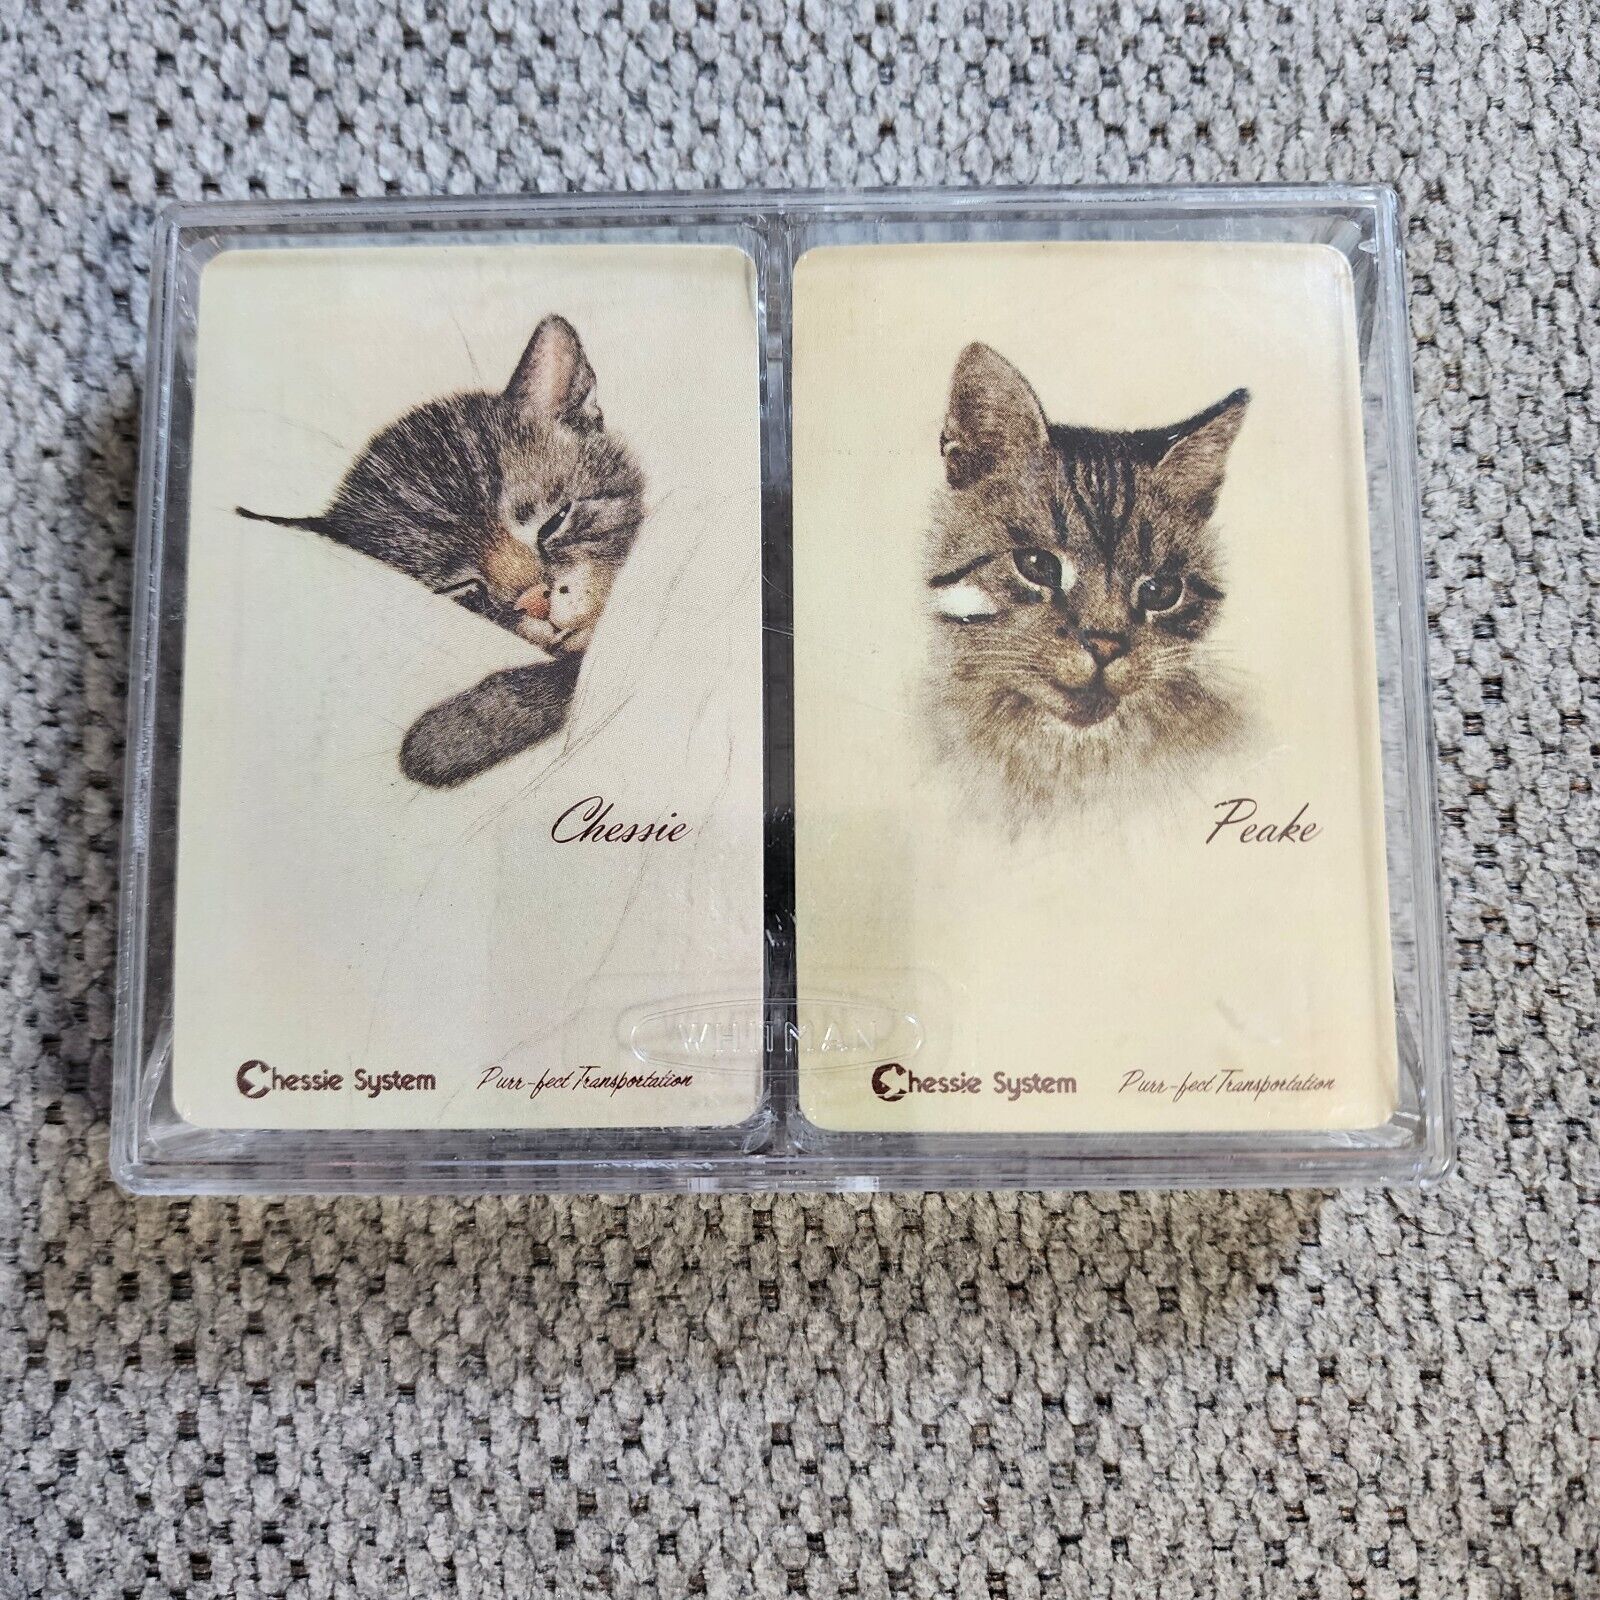 NIB Vintage Chessie System Cats Kittens Playing Card Sets 2 Decks  Sealed